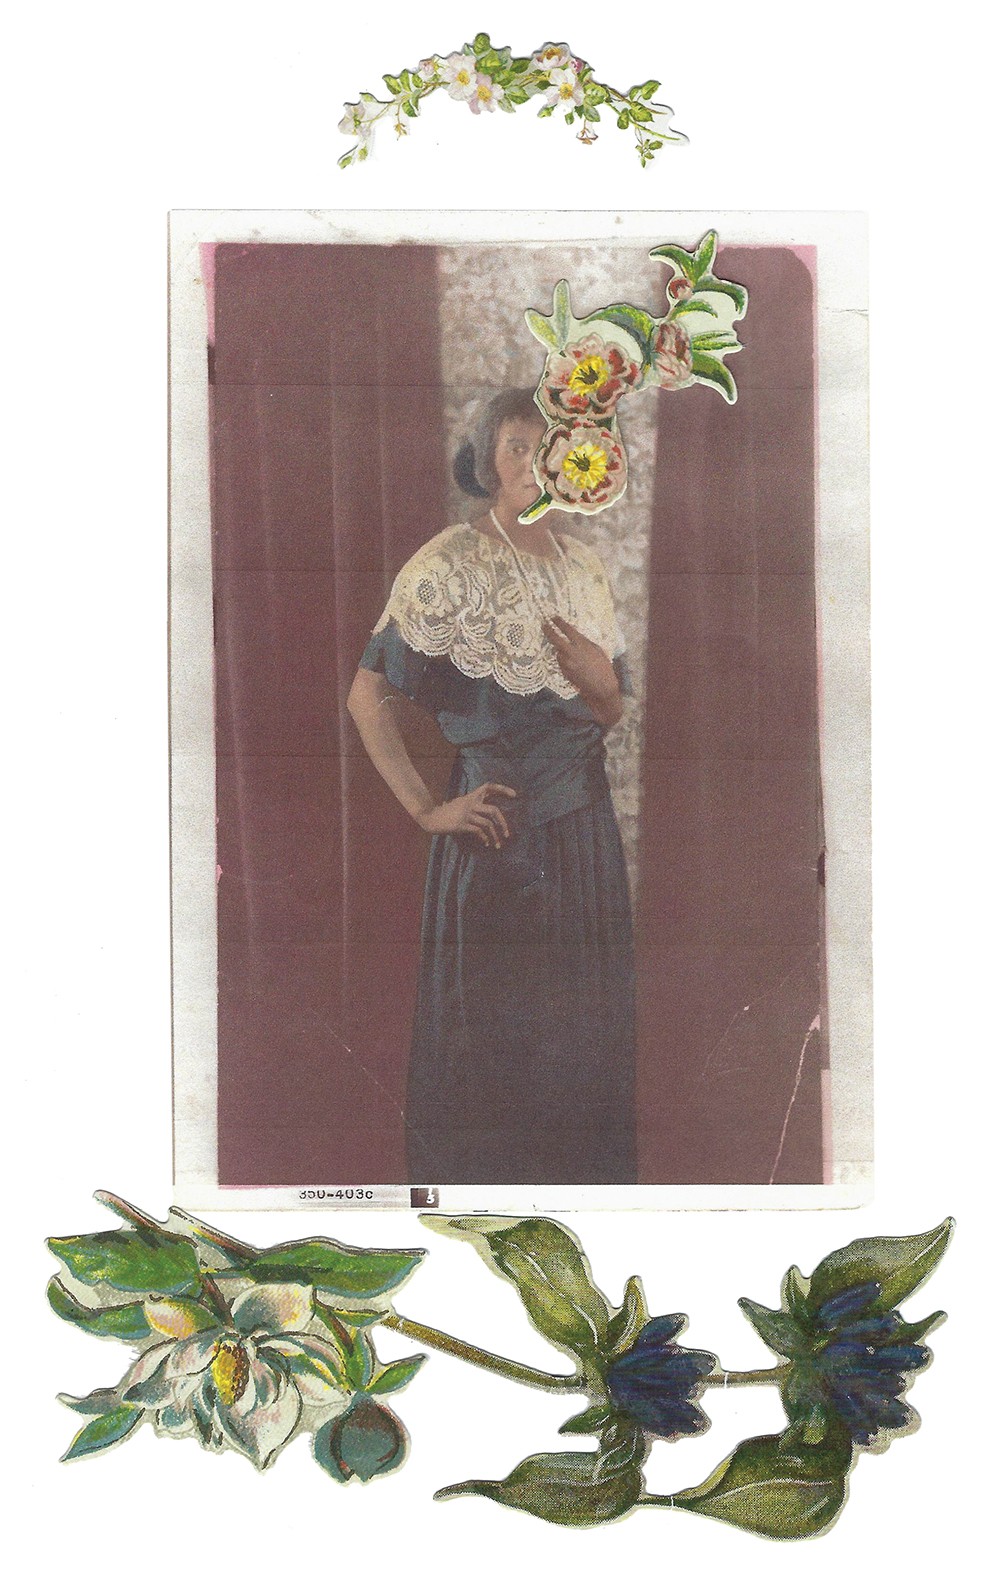 Collage of a woman wearing a lace dress and pearls, with cut-out flowers overlaid.